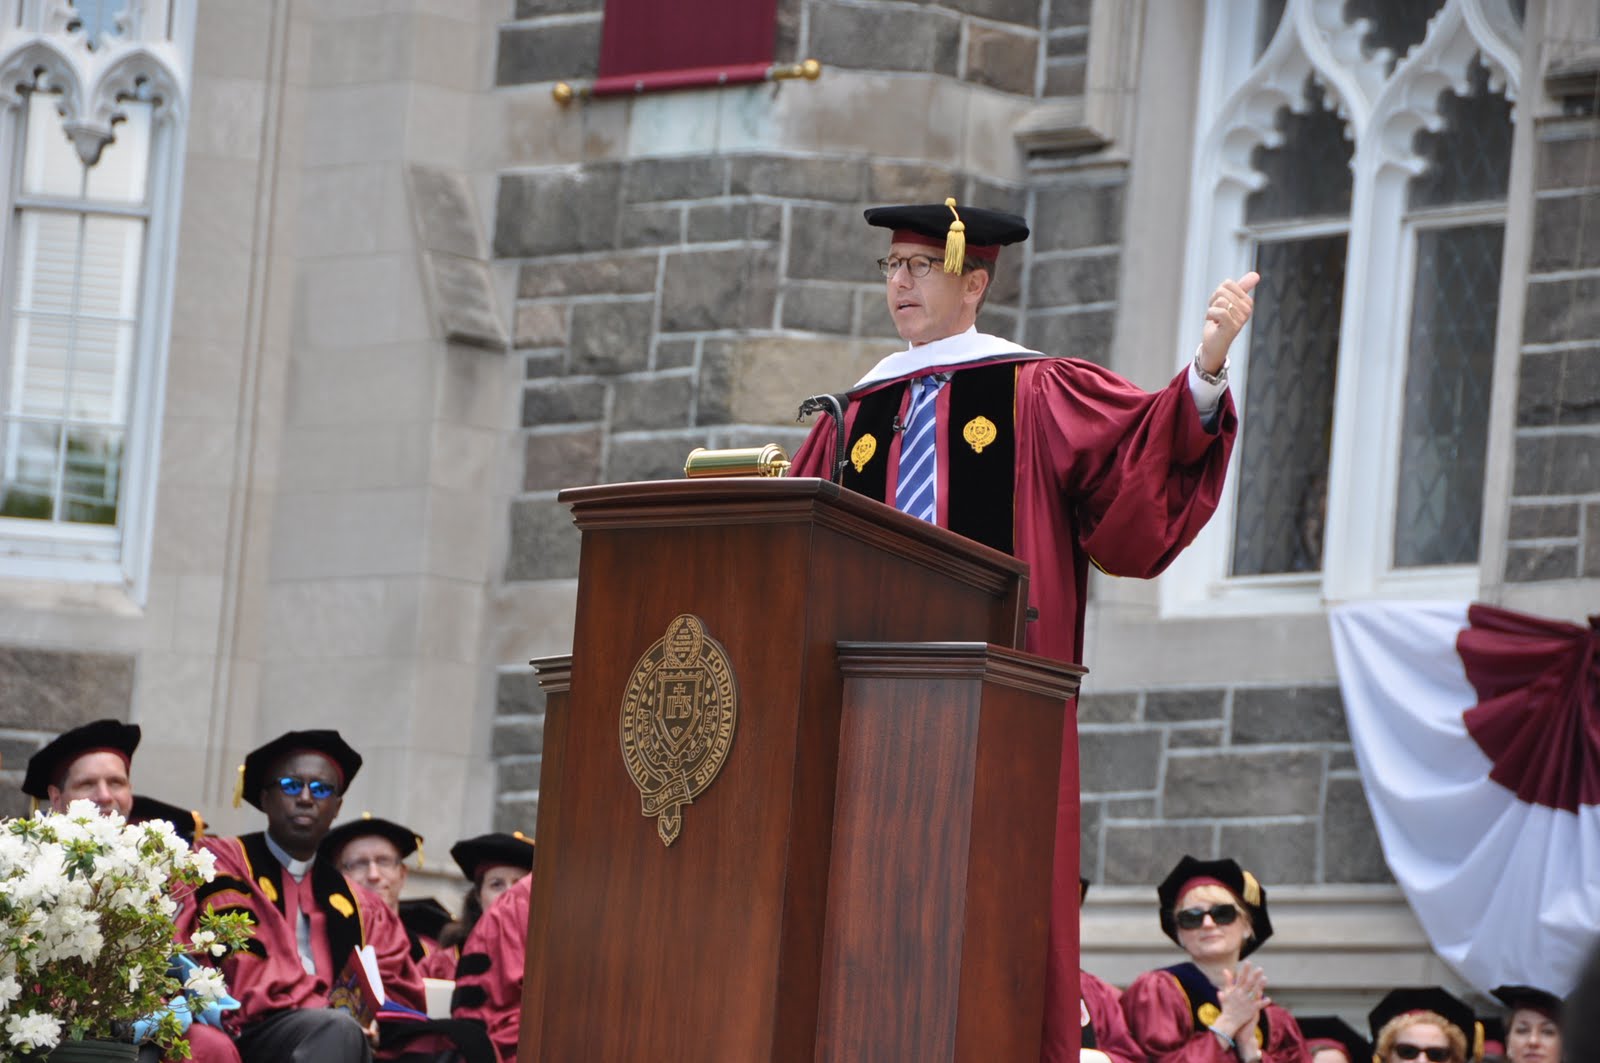 Fordham's Commencement Hour by Hour